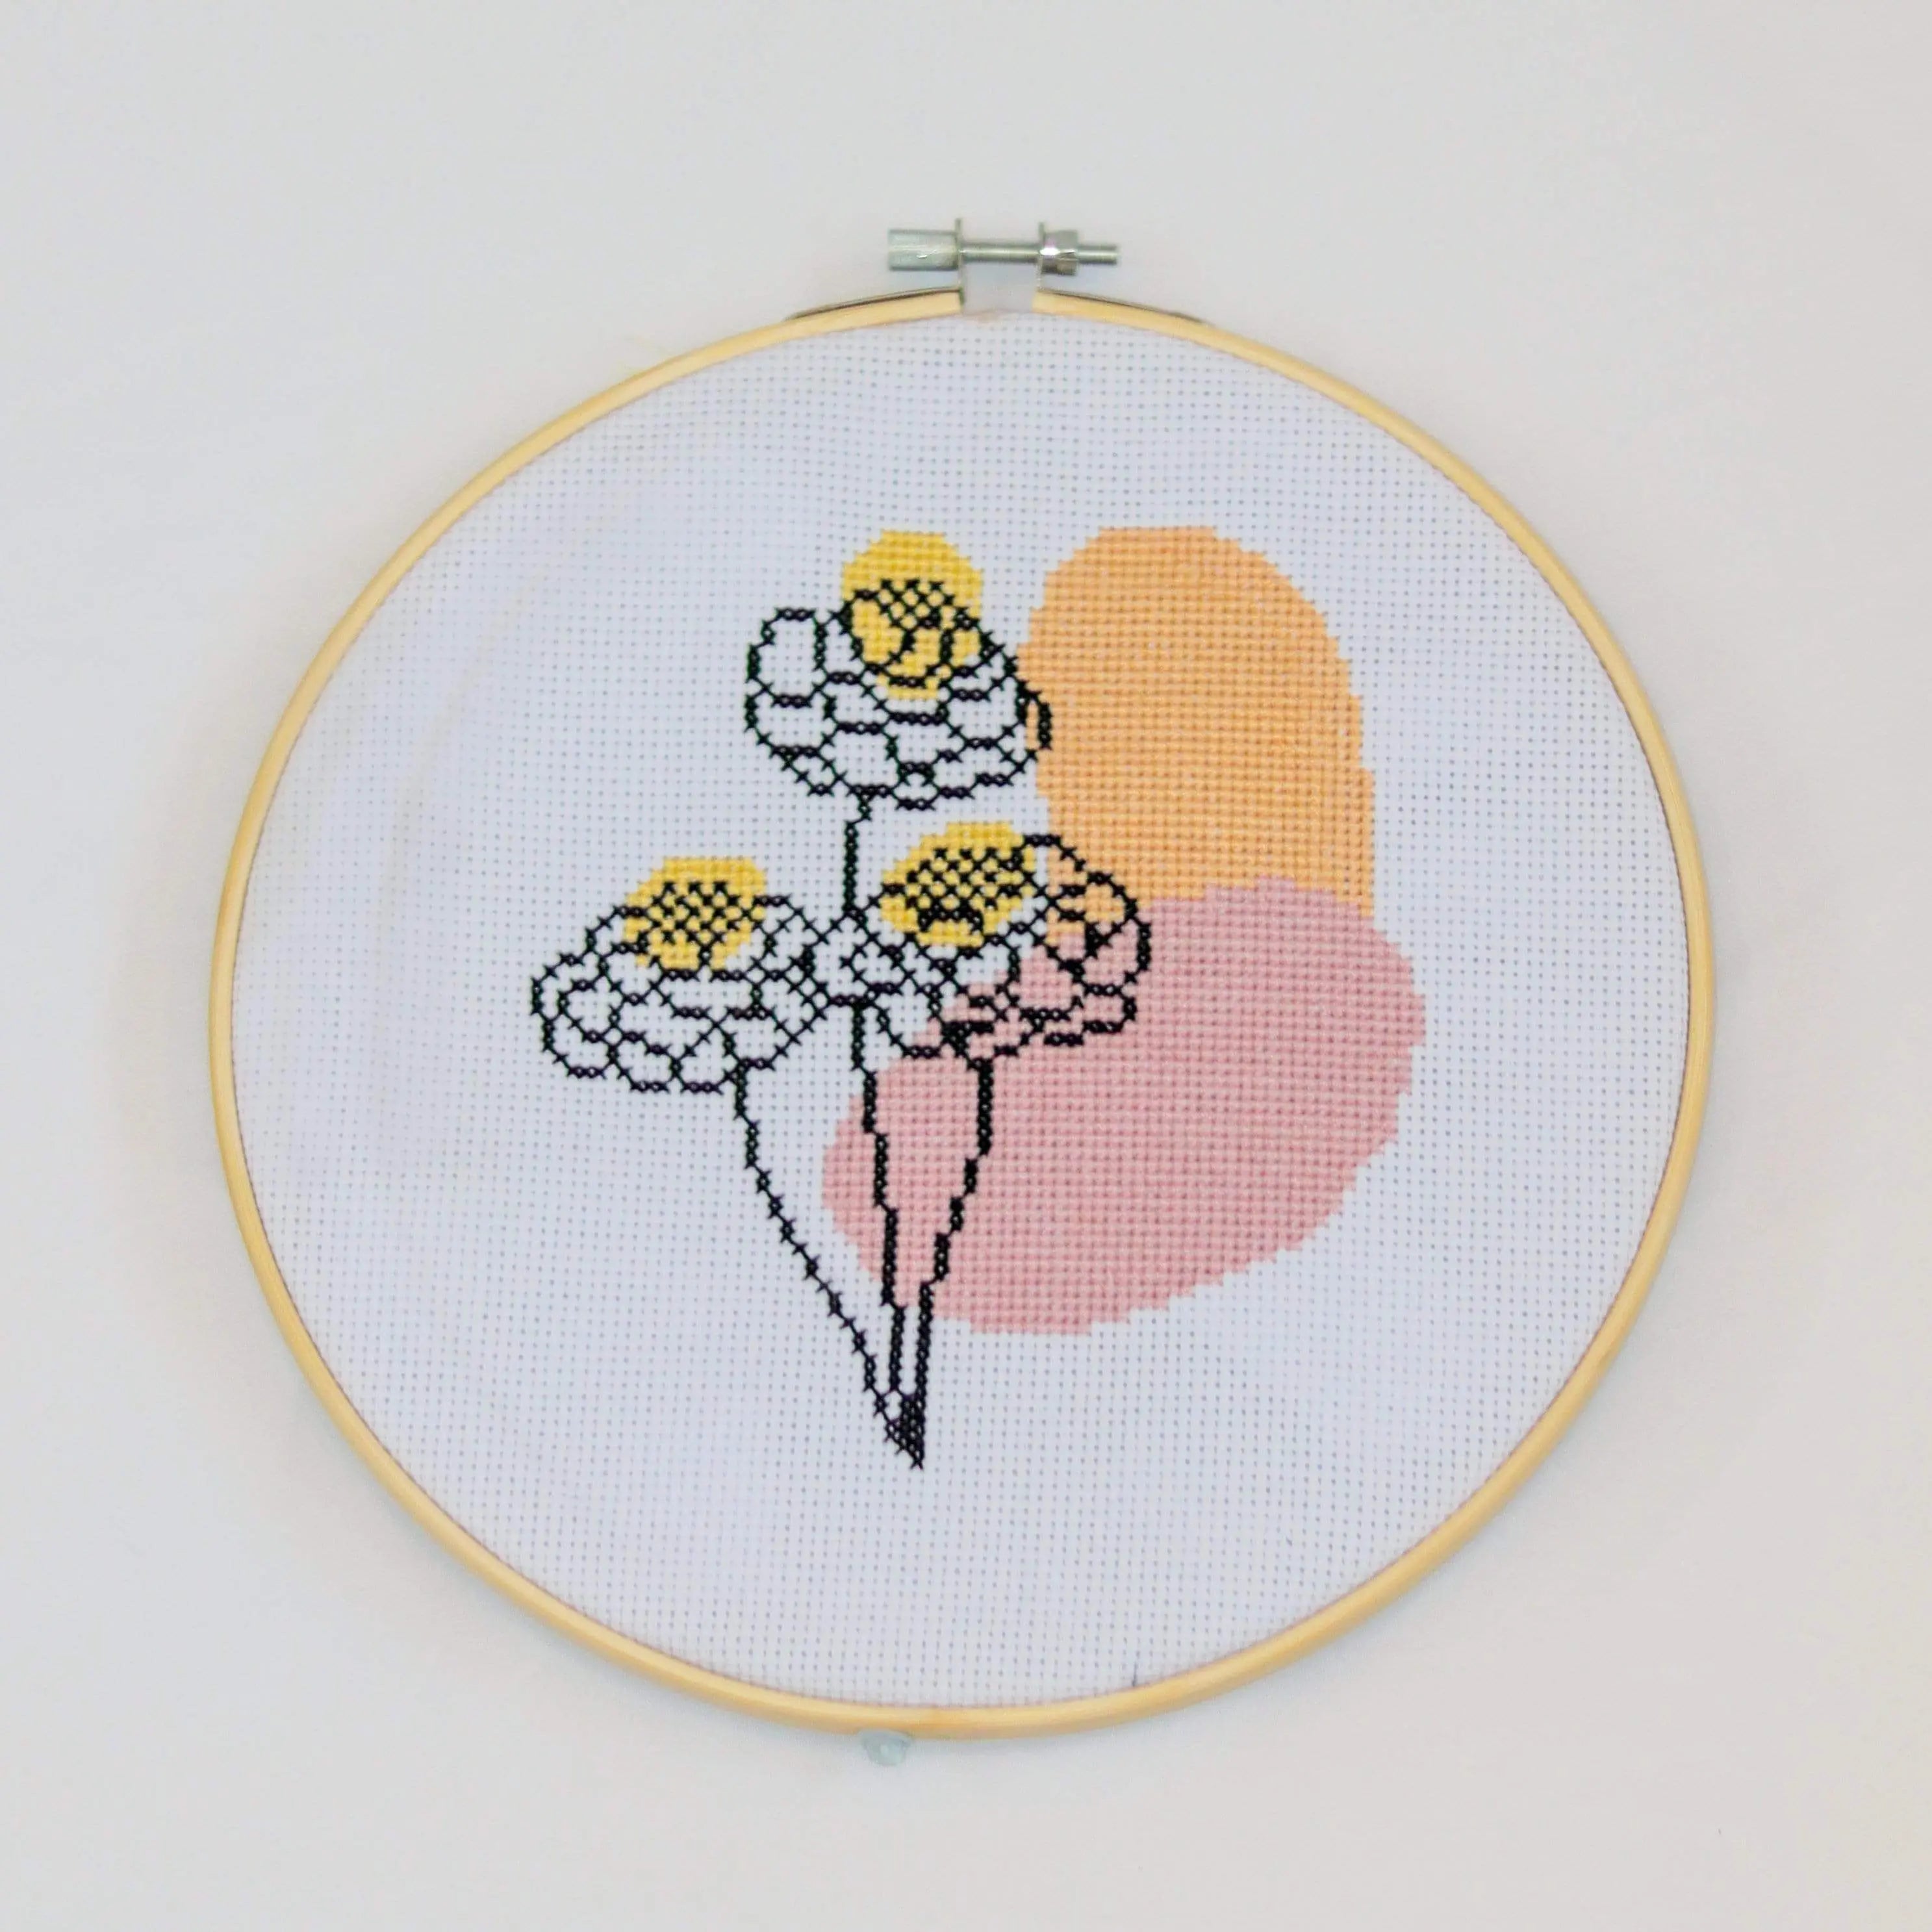 Craft Club Co BLOOM Cross Stitch Kit. The design with a plain white background.